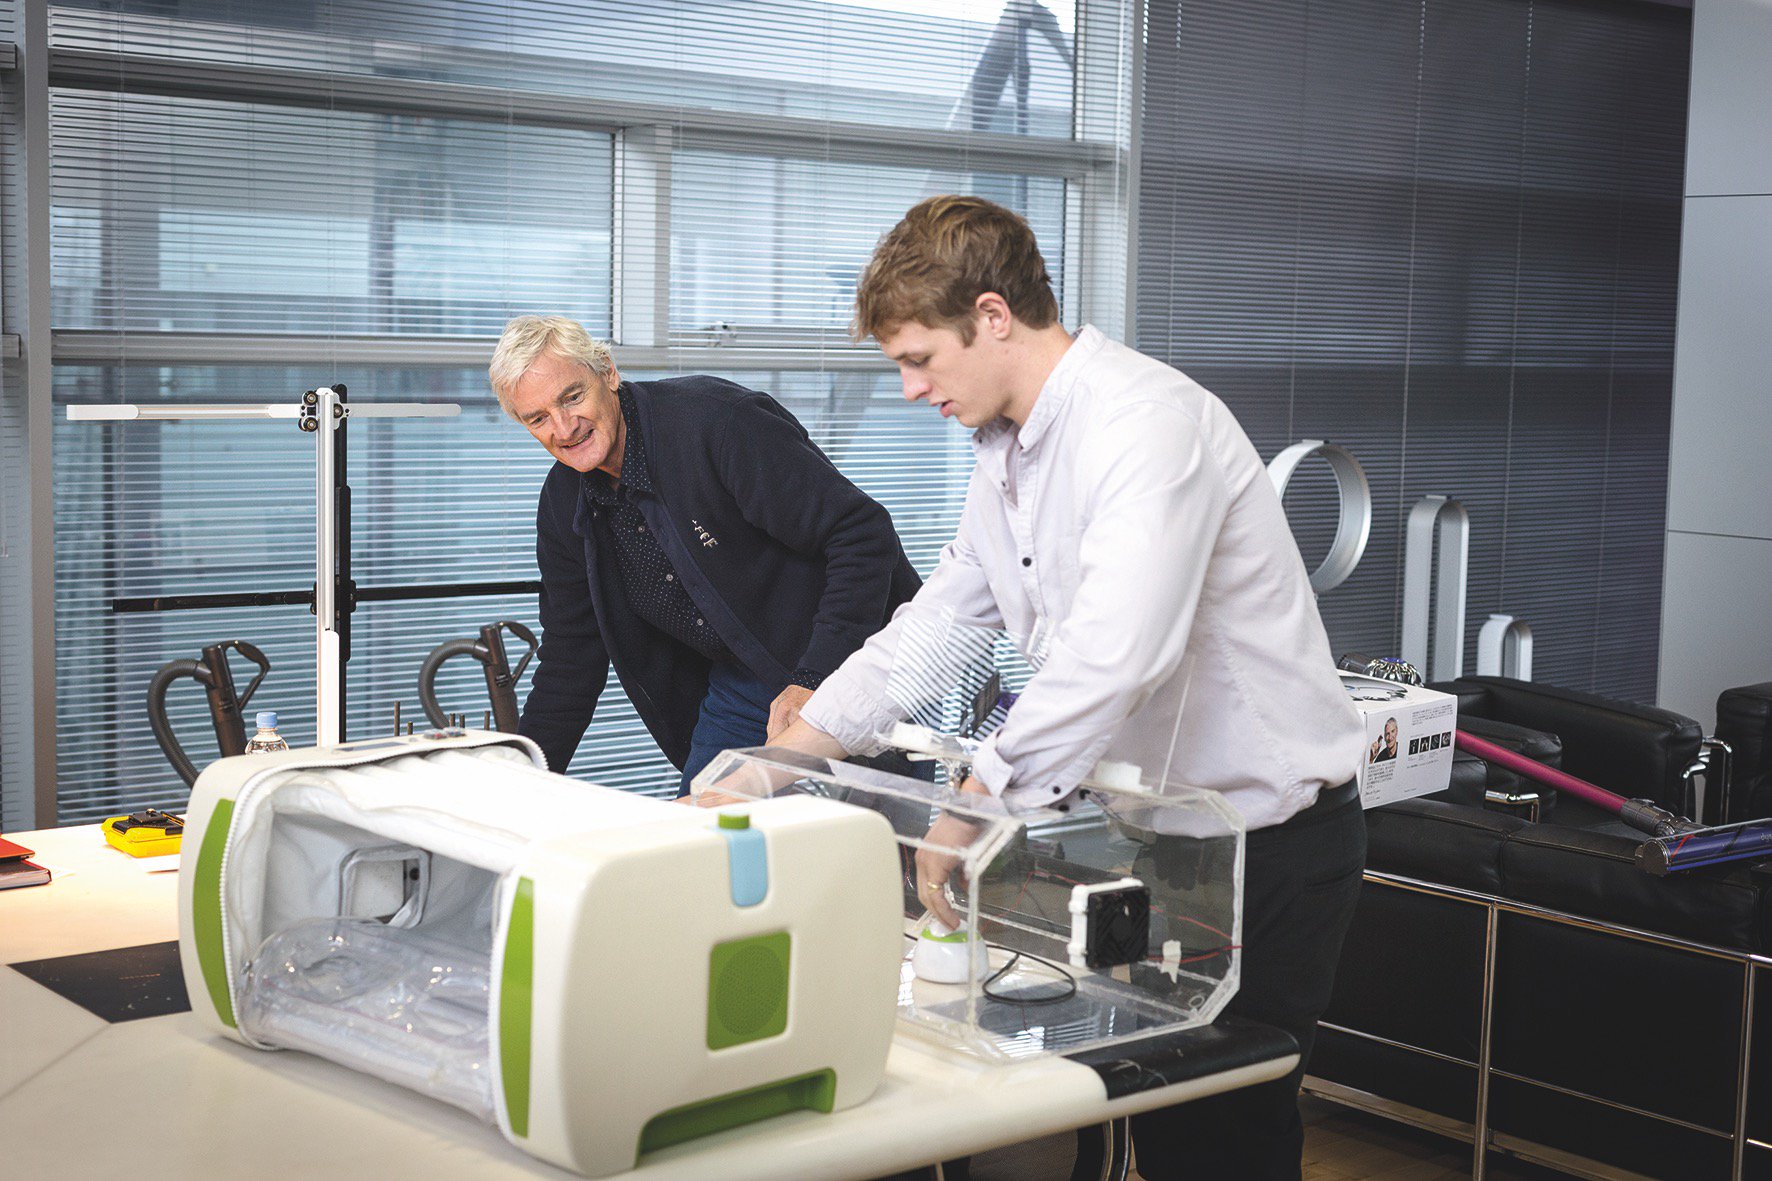 Happy Birthday James Dyson! Here is James meeting JDA winners - could this be you in 2017? Enter today. 